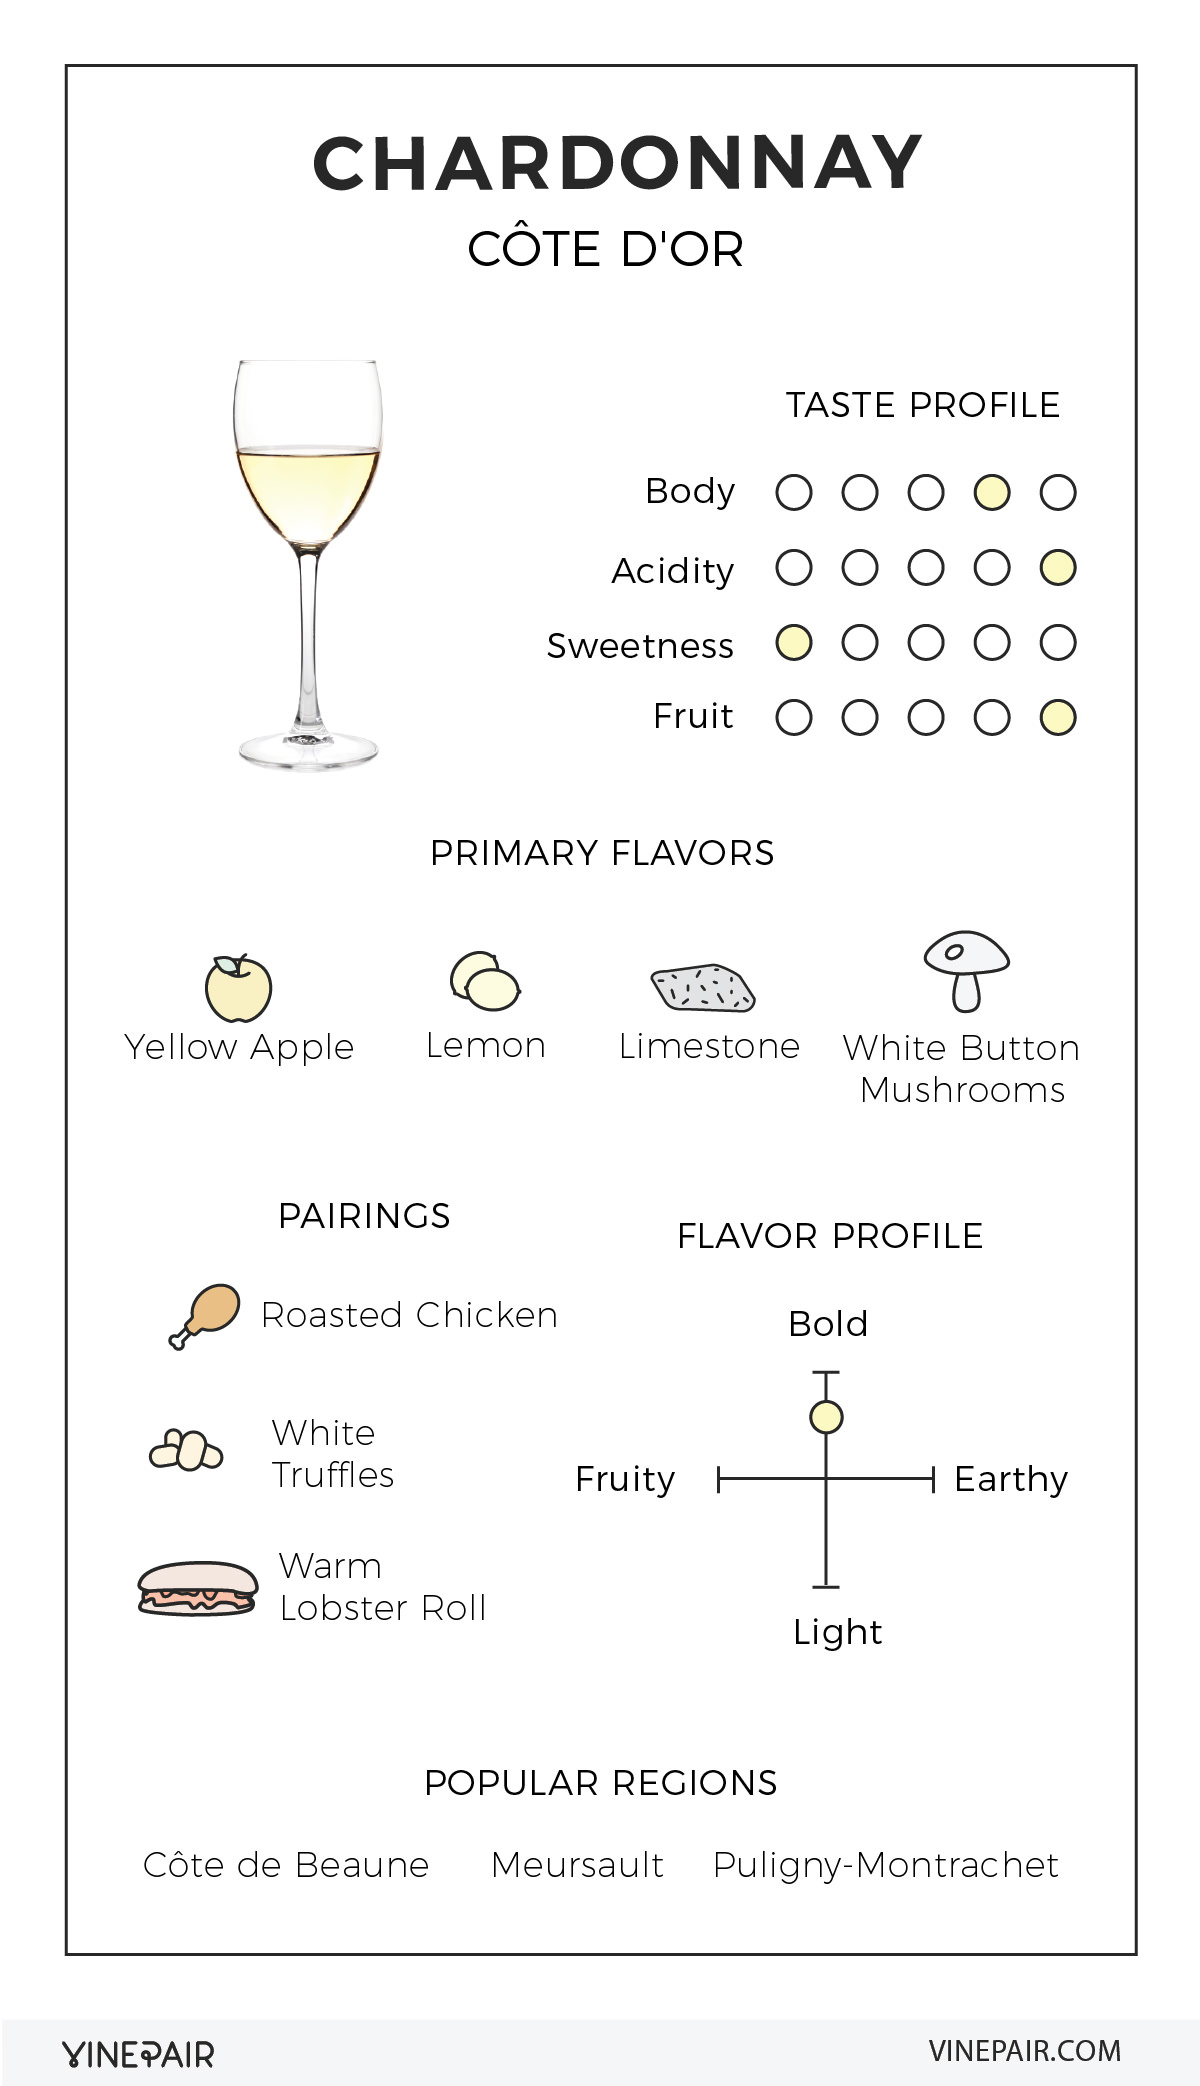 An Illustrated Guide to Chardonnay from the Cote d'Or